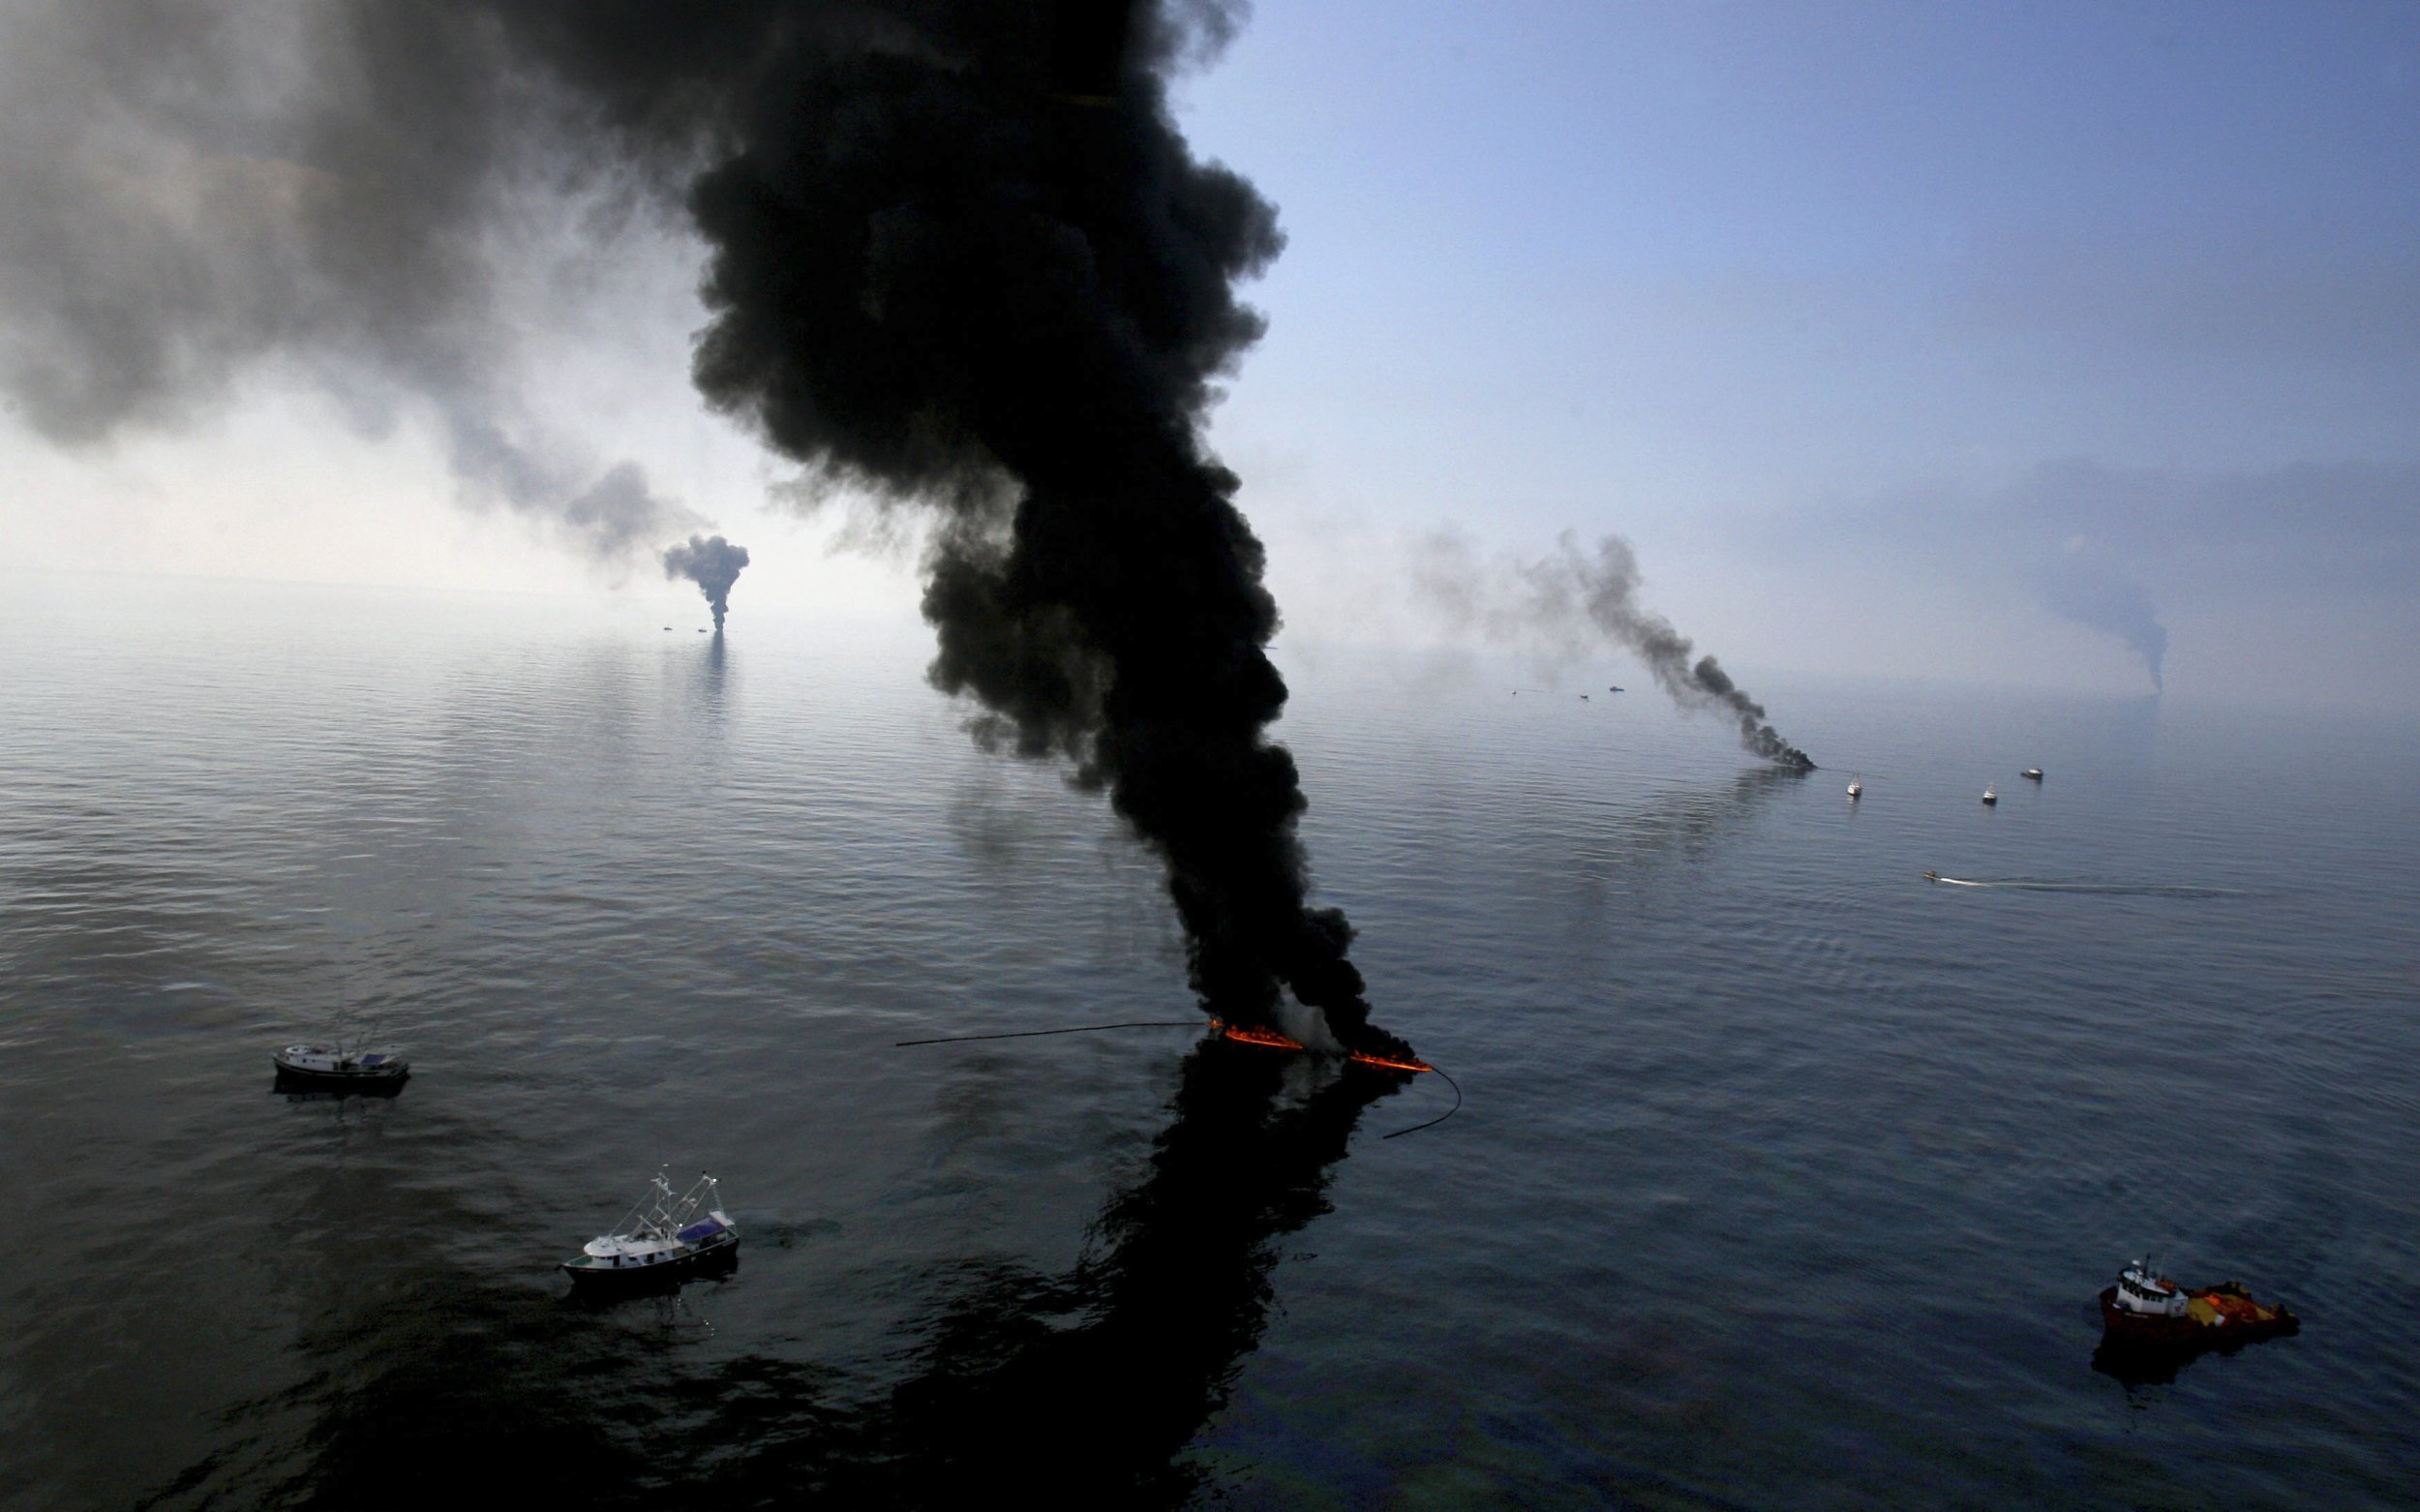 Bp Oil Spill British Energy Giant Faces 14b In Clean Water Act Penalties Over 2010 Gulf Of